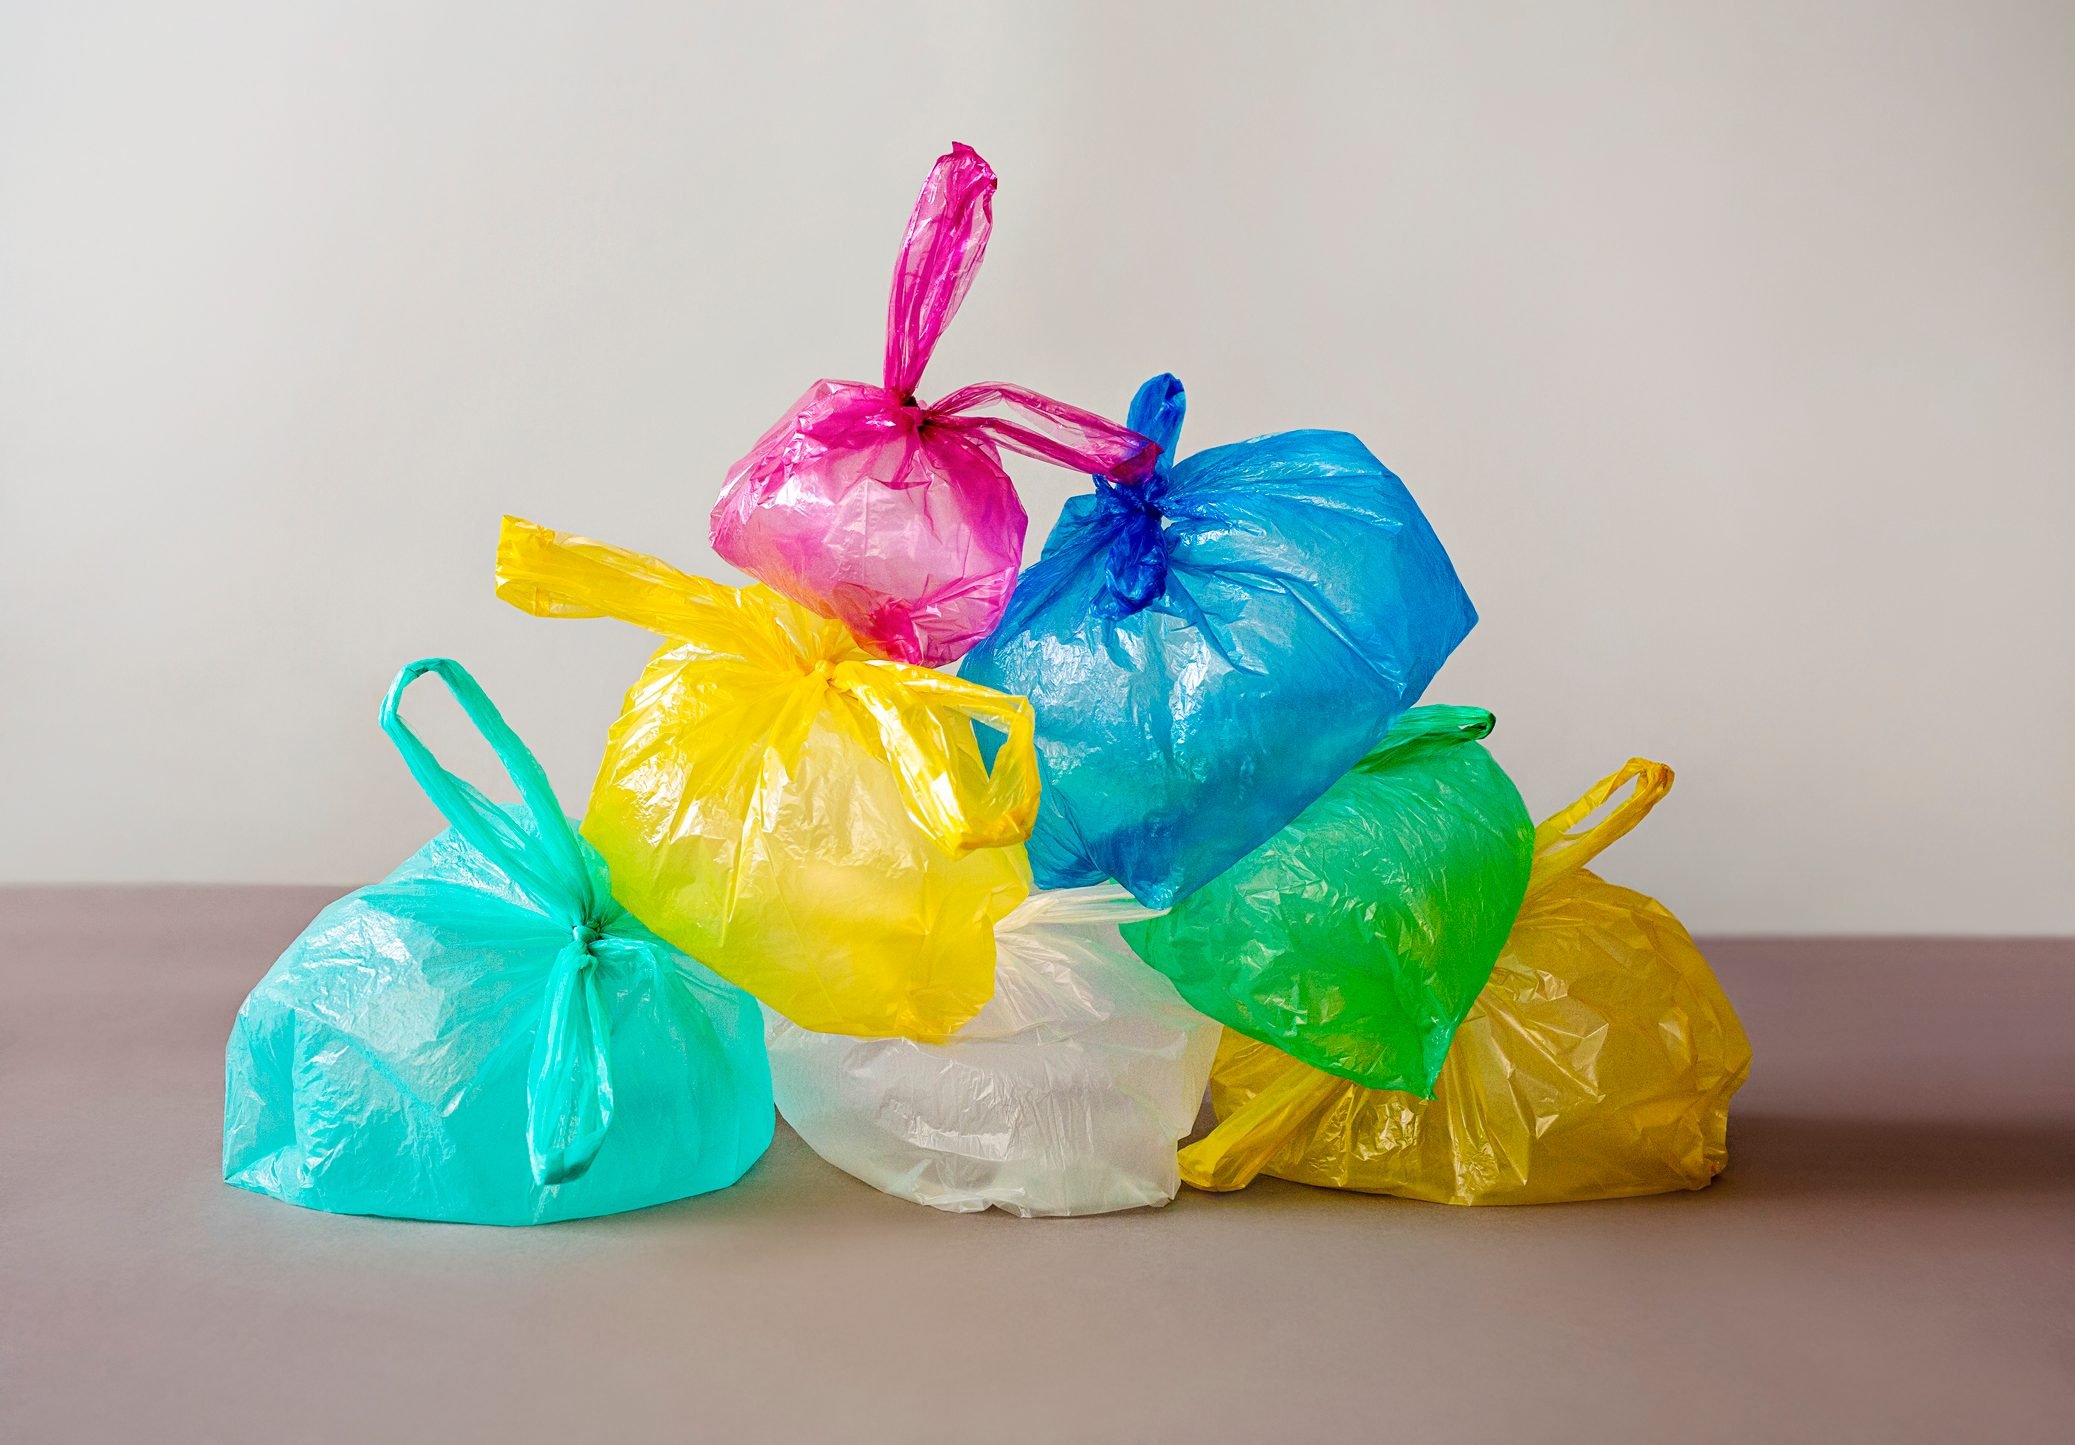 Are Plastic Bags Recyclable?